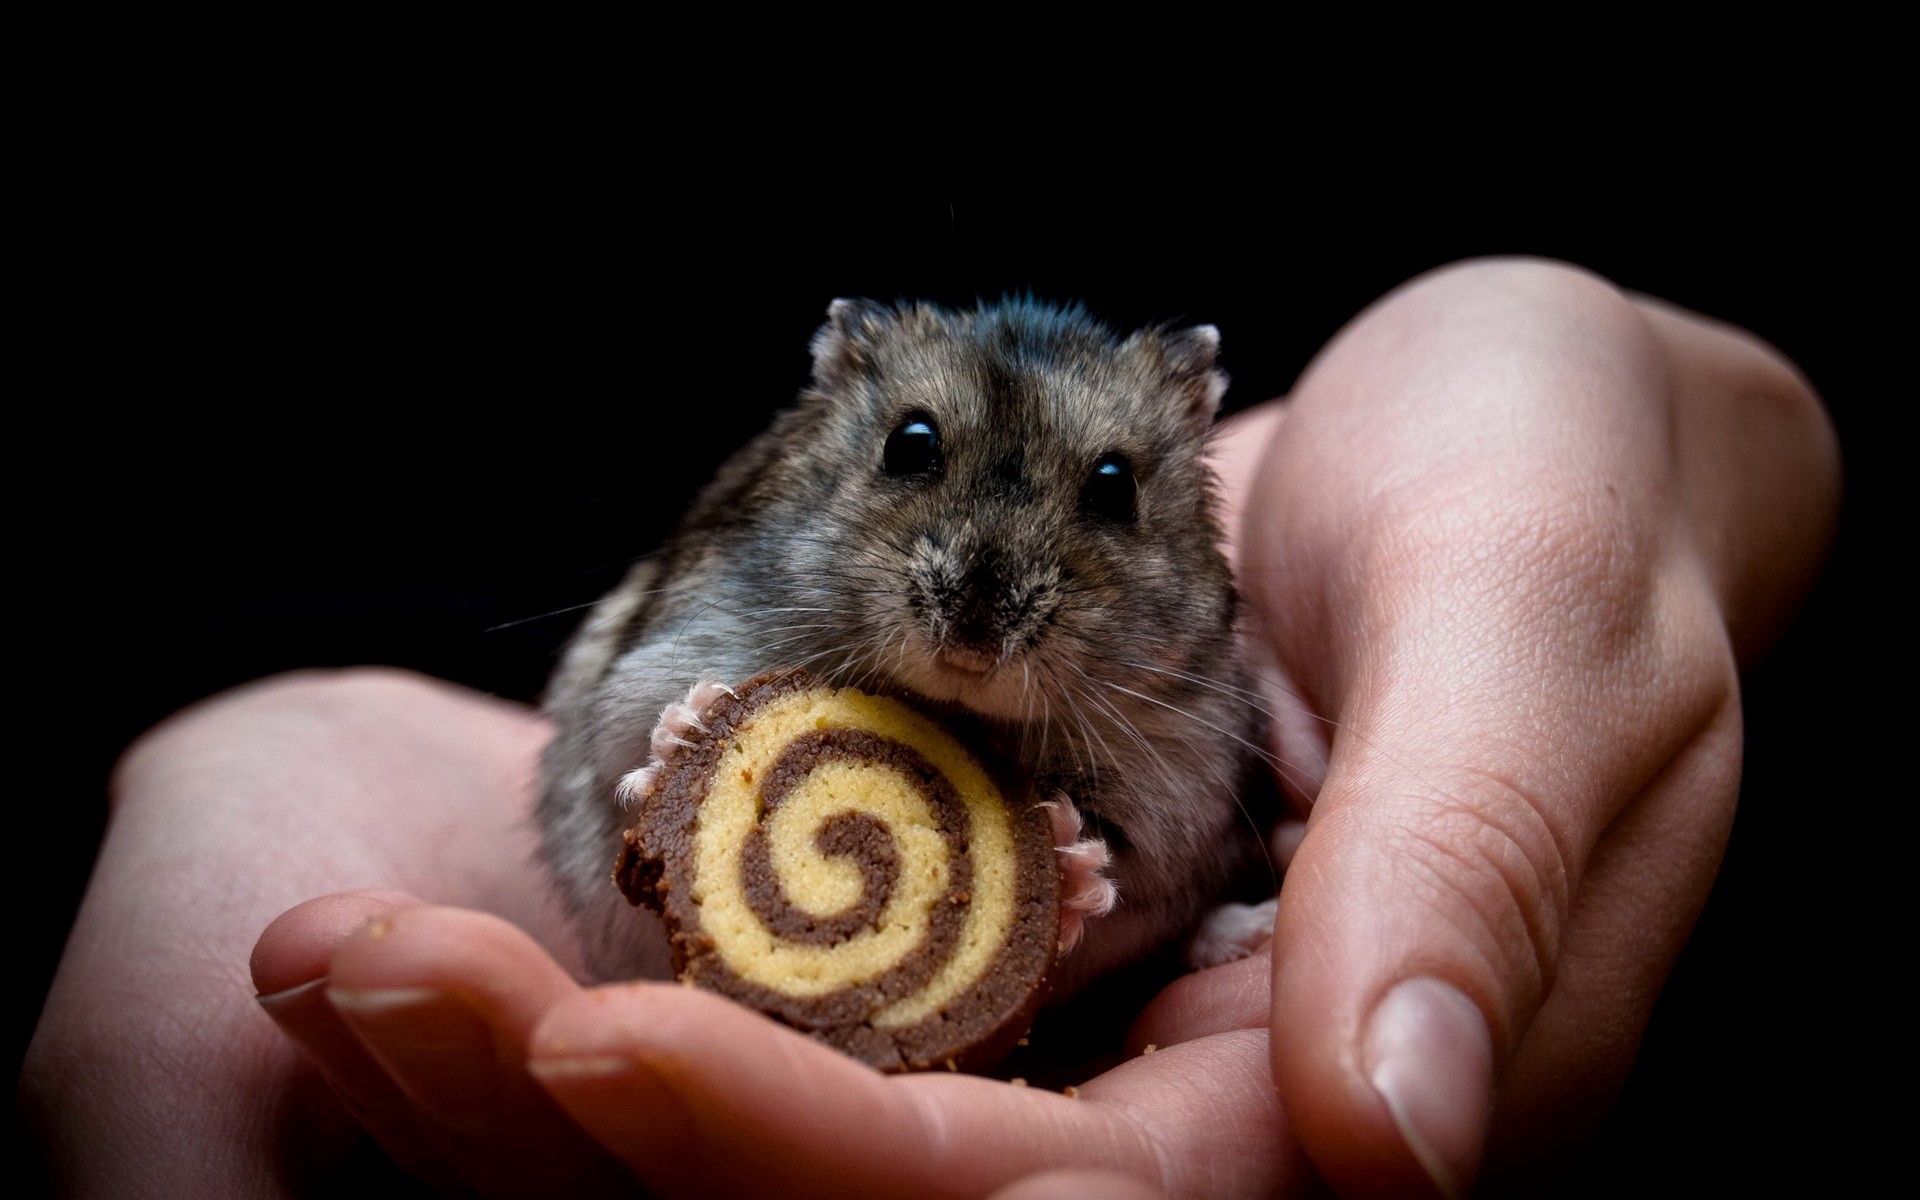 animals, palms, cookies, palm, hands, hamster